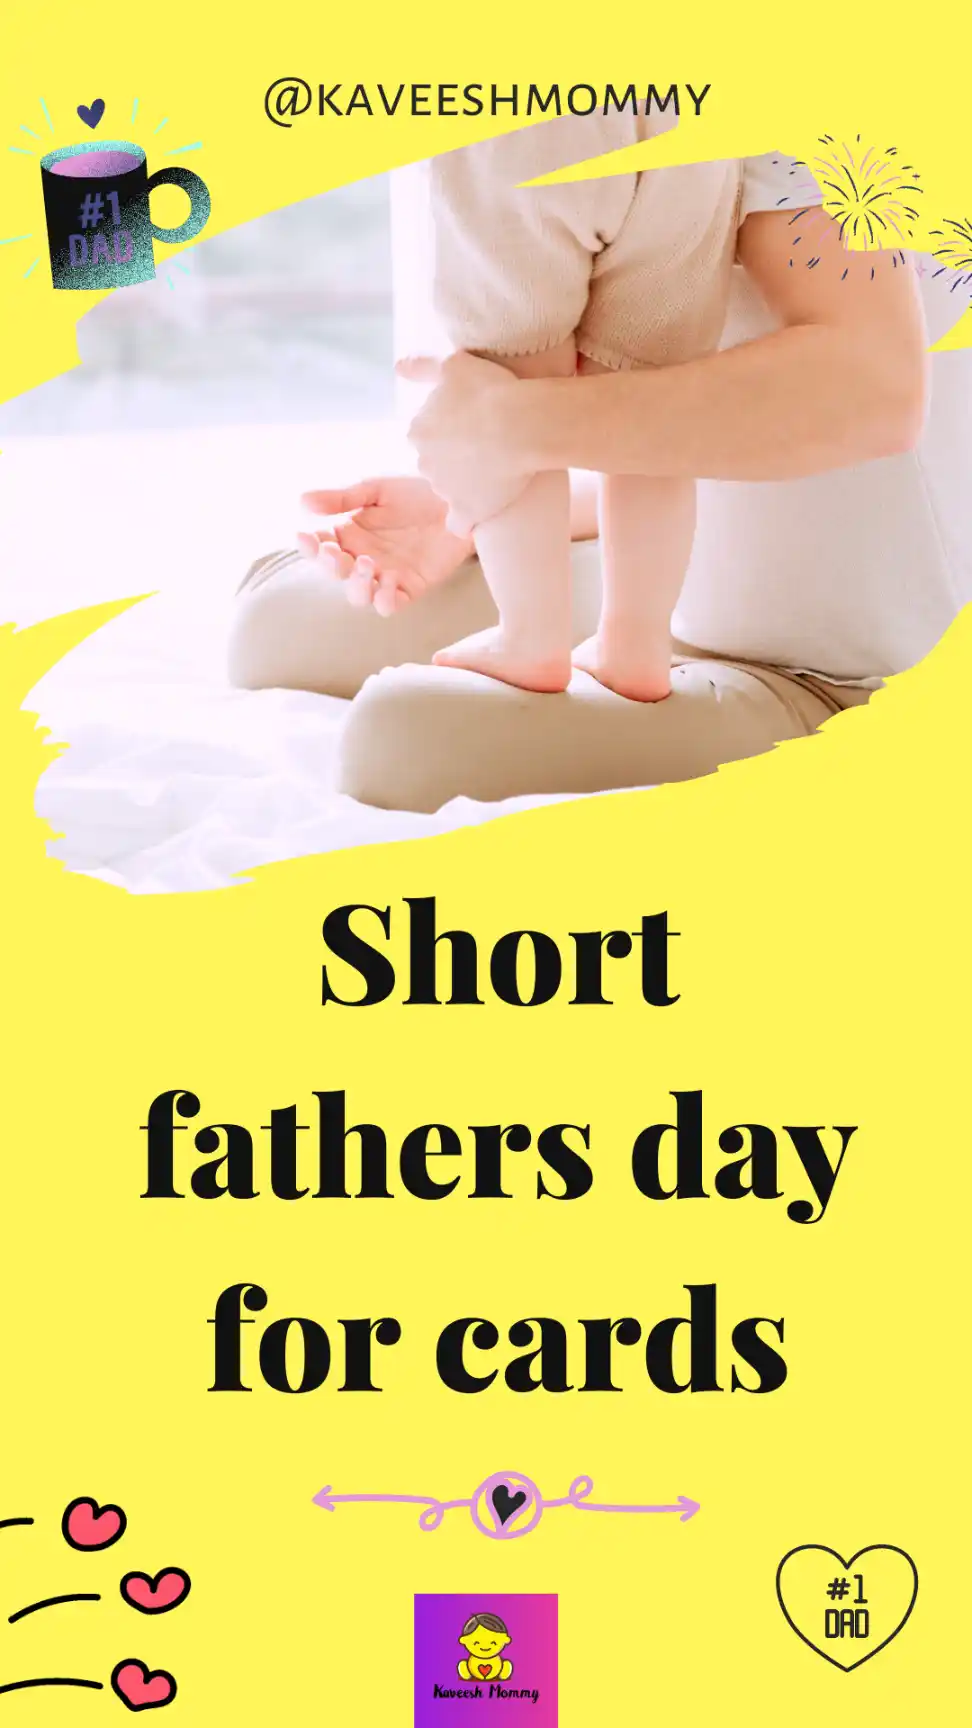 Touching Best Short Fathers Day Quotes That Your Dad Will Love-kaveesh mommy 